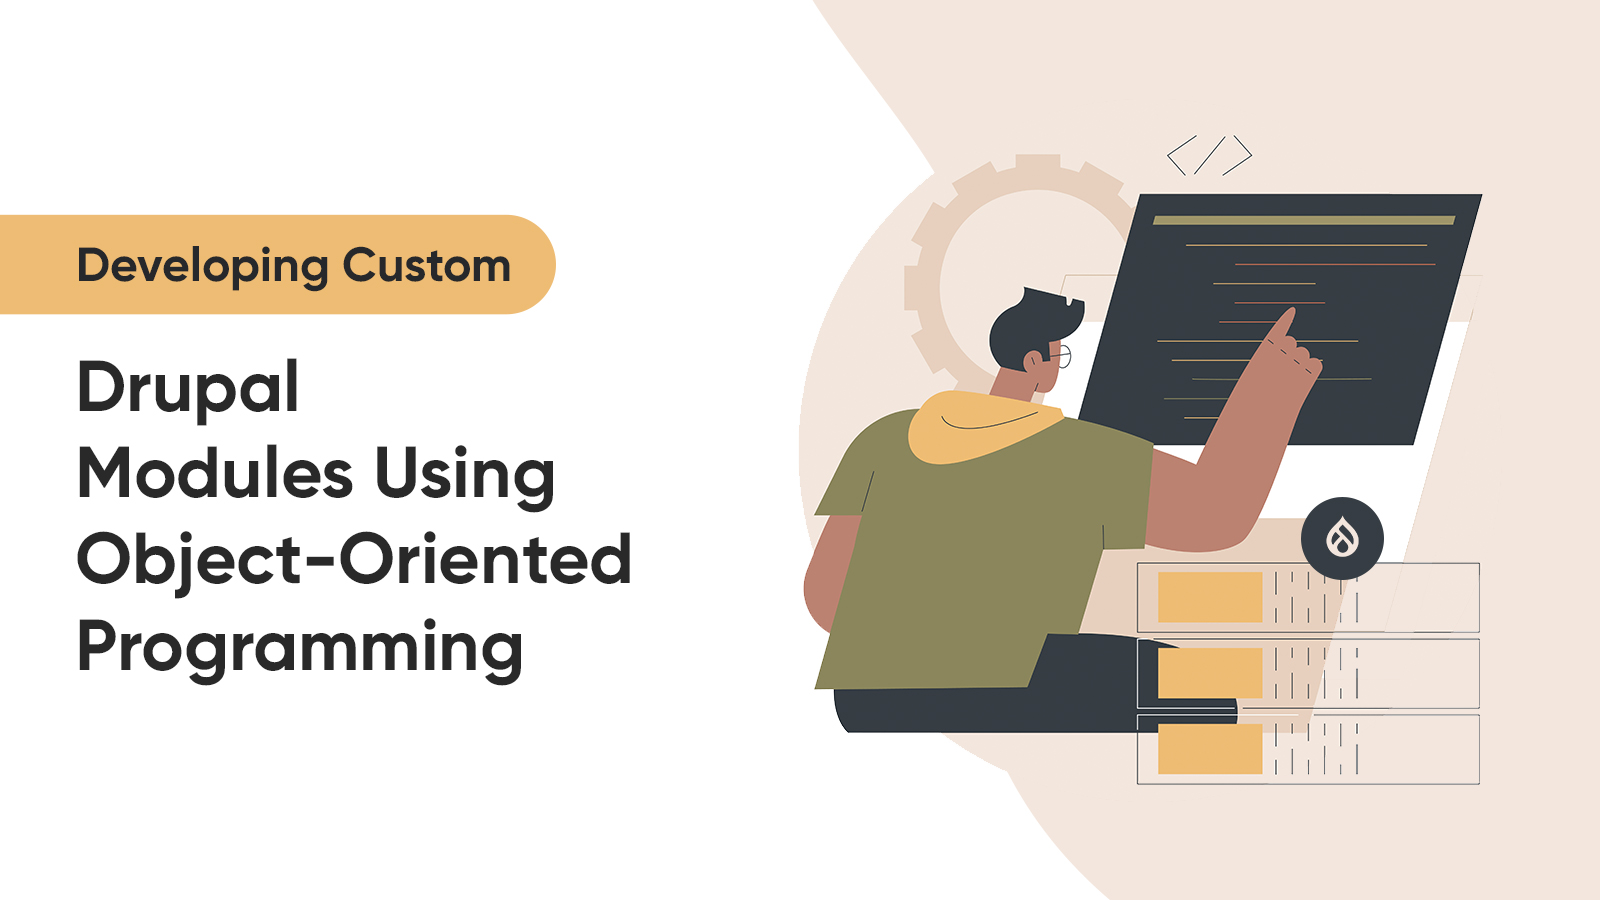 Developing Custom Drupal Modules Using Object-Oriented Programming